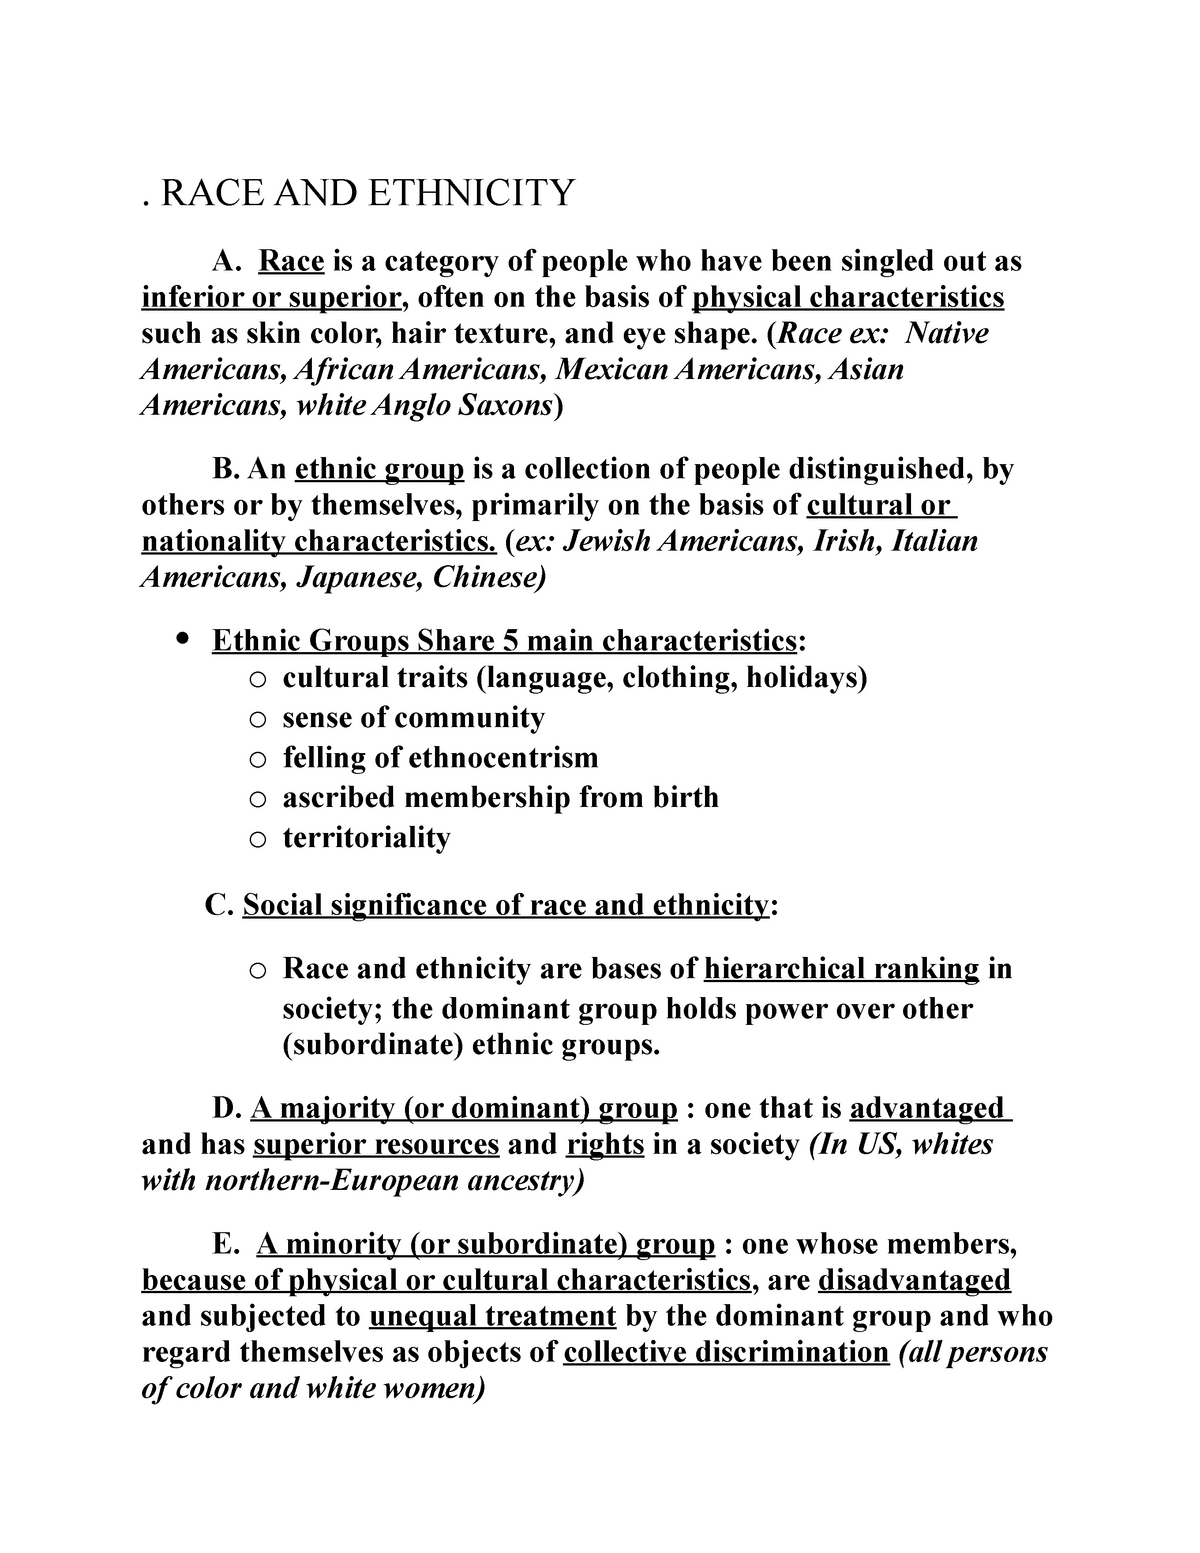 essays on race and ethnicity